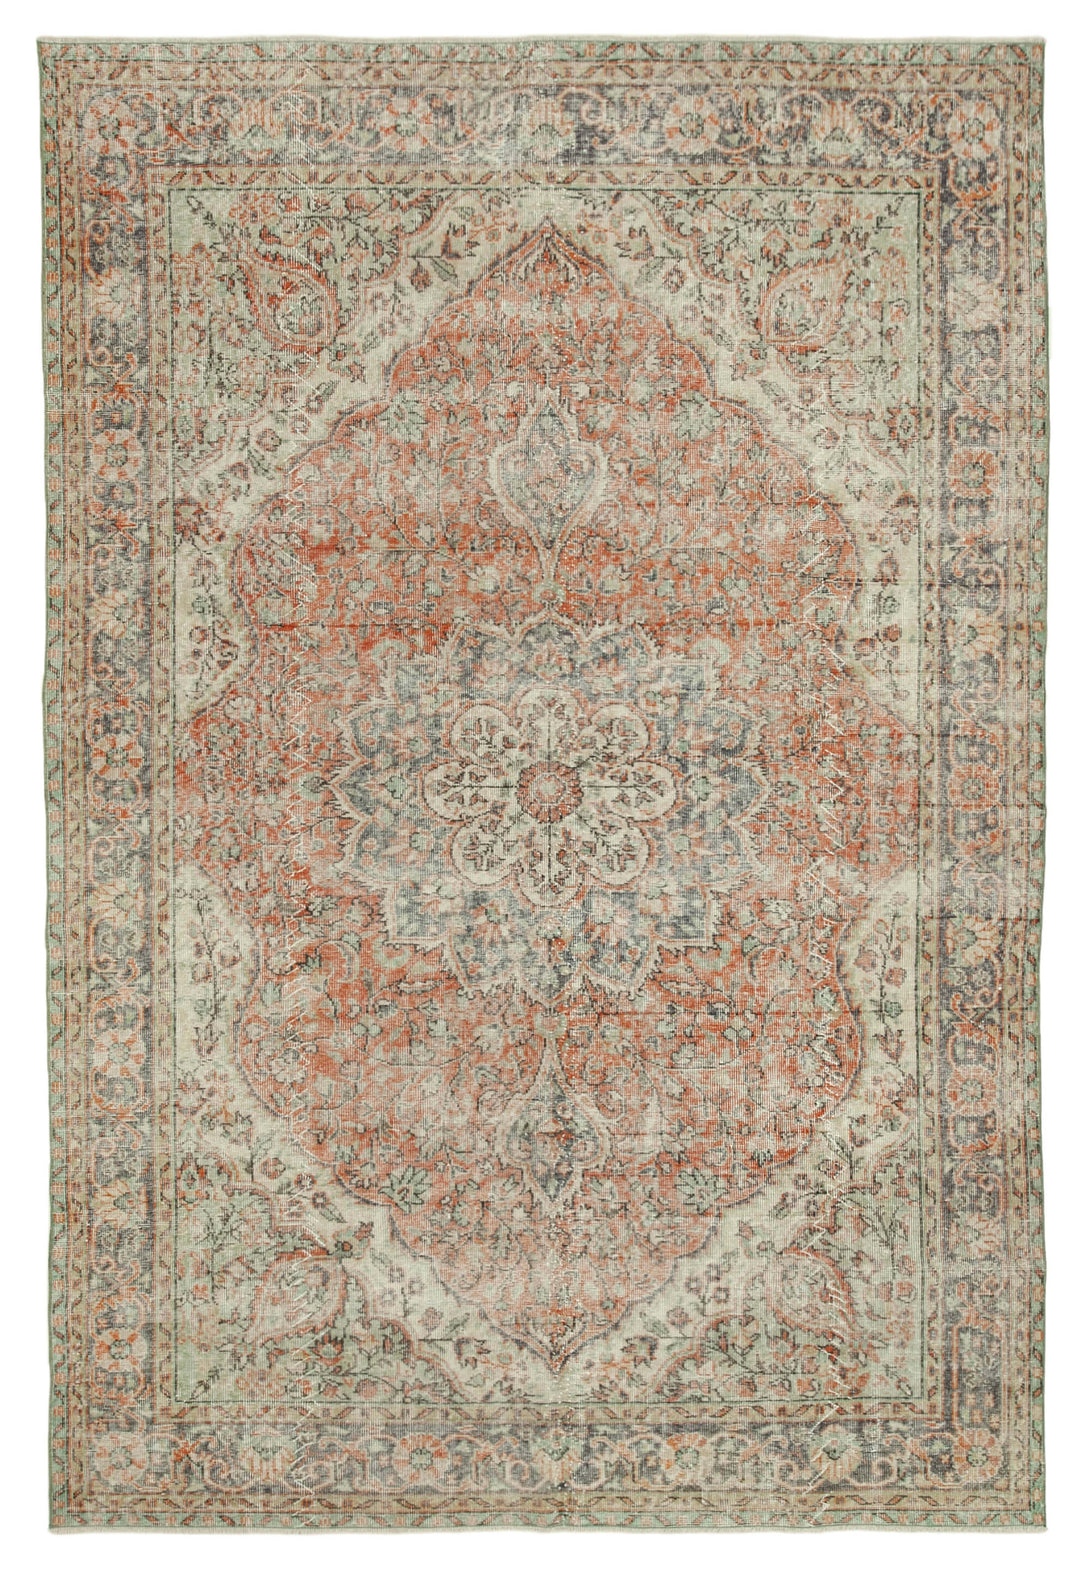 Handmade White Wash Area Rug > Design# OL-AC-36871 > Size: 6'-11" x 10'-4", Carpet Culture Rugs, Handmade Rugs, NYC Rugs, New Rugs, Shop Rugs, Rug Store, Outlet Rugs, SoHo Rugs, Rugs in USA